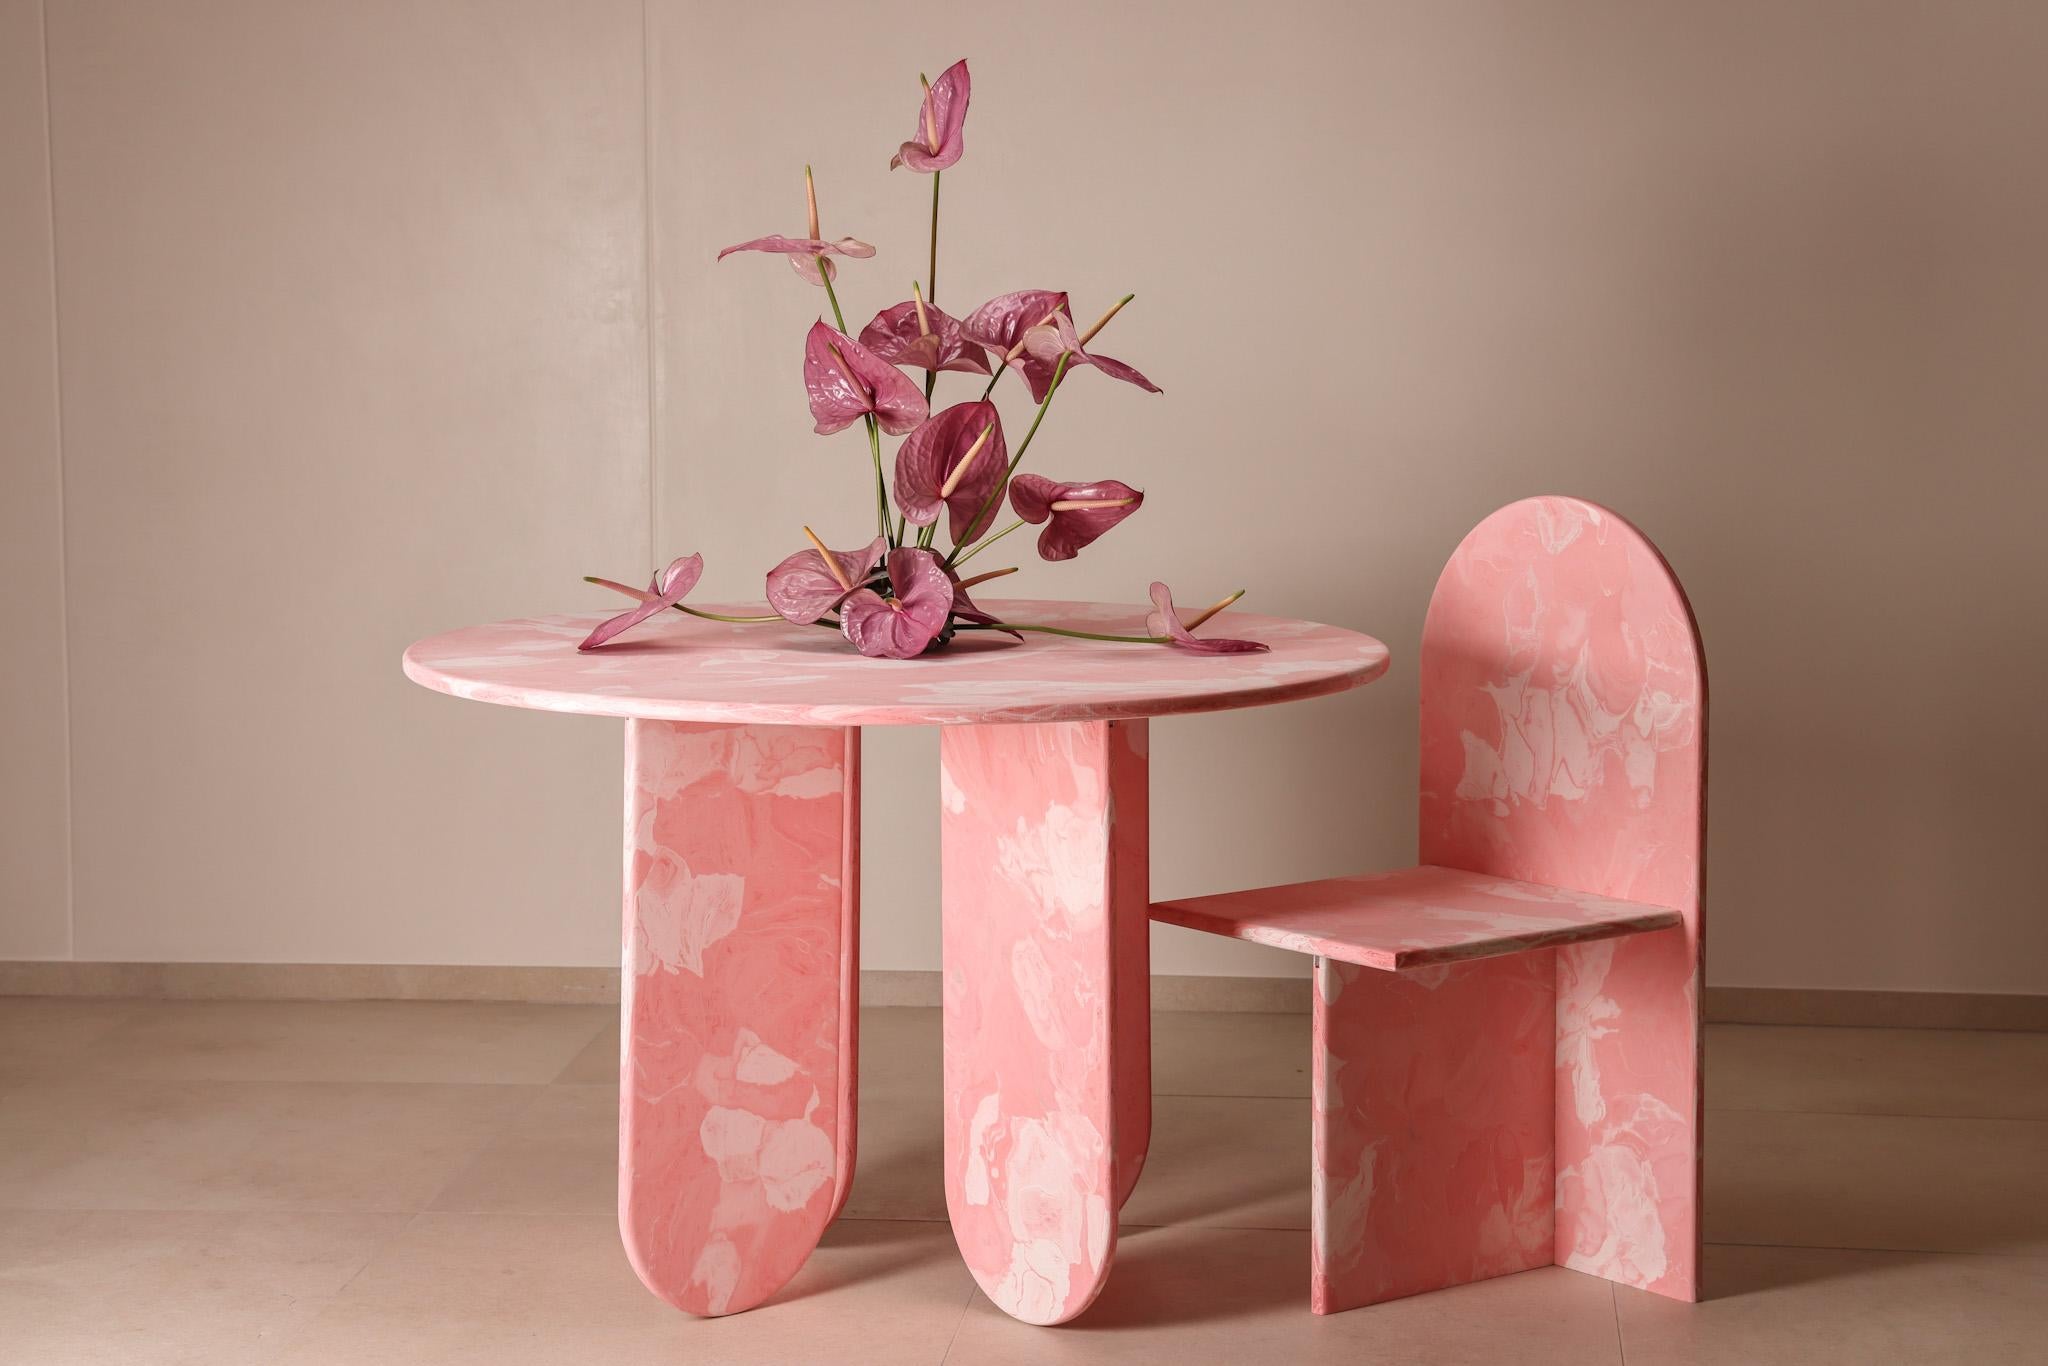 Dutch 2x Contemporary Chairs Pink 100% Recycled Plastic Hand-Crafted by Anqa Studios For Sale